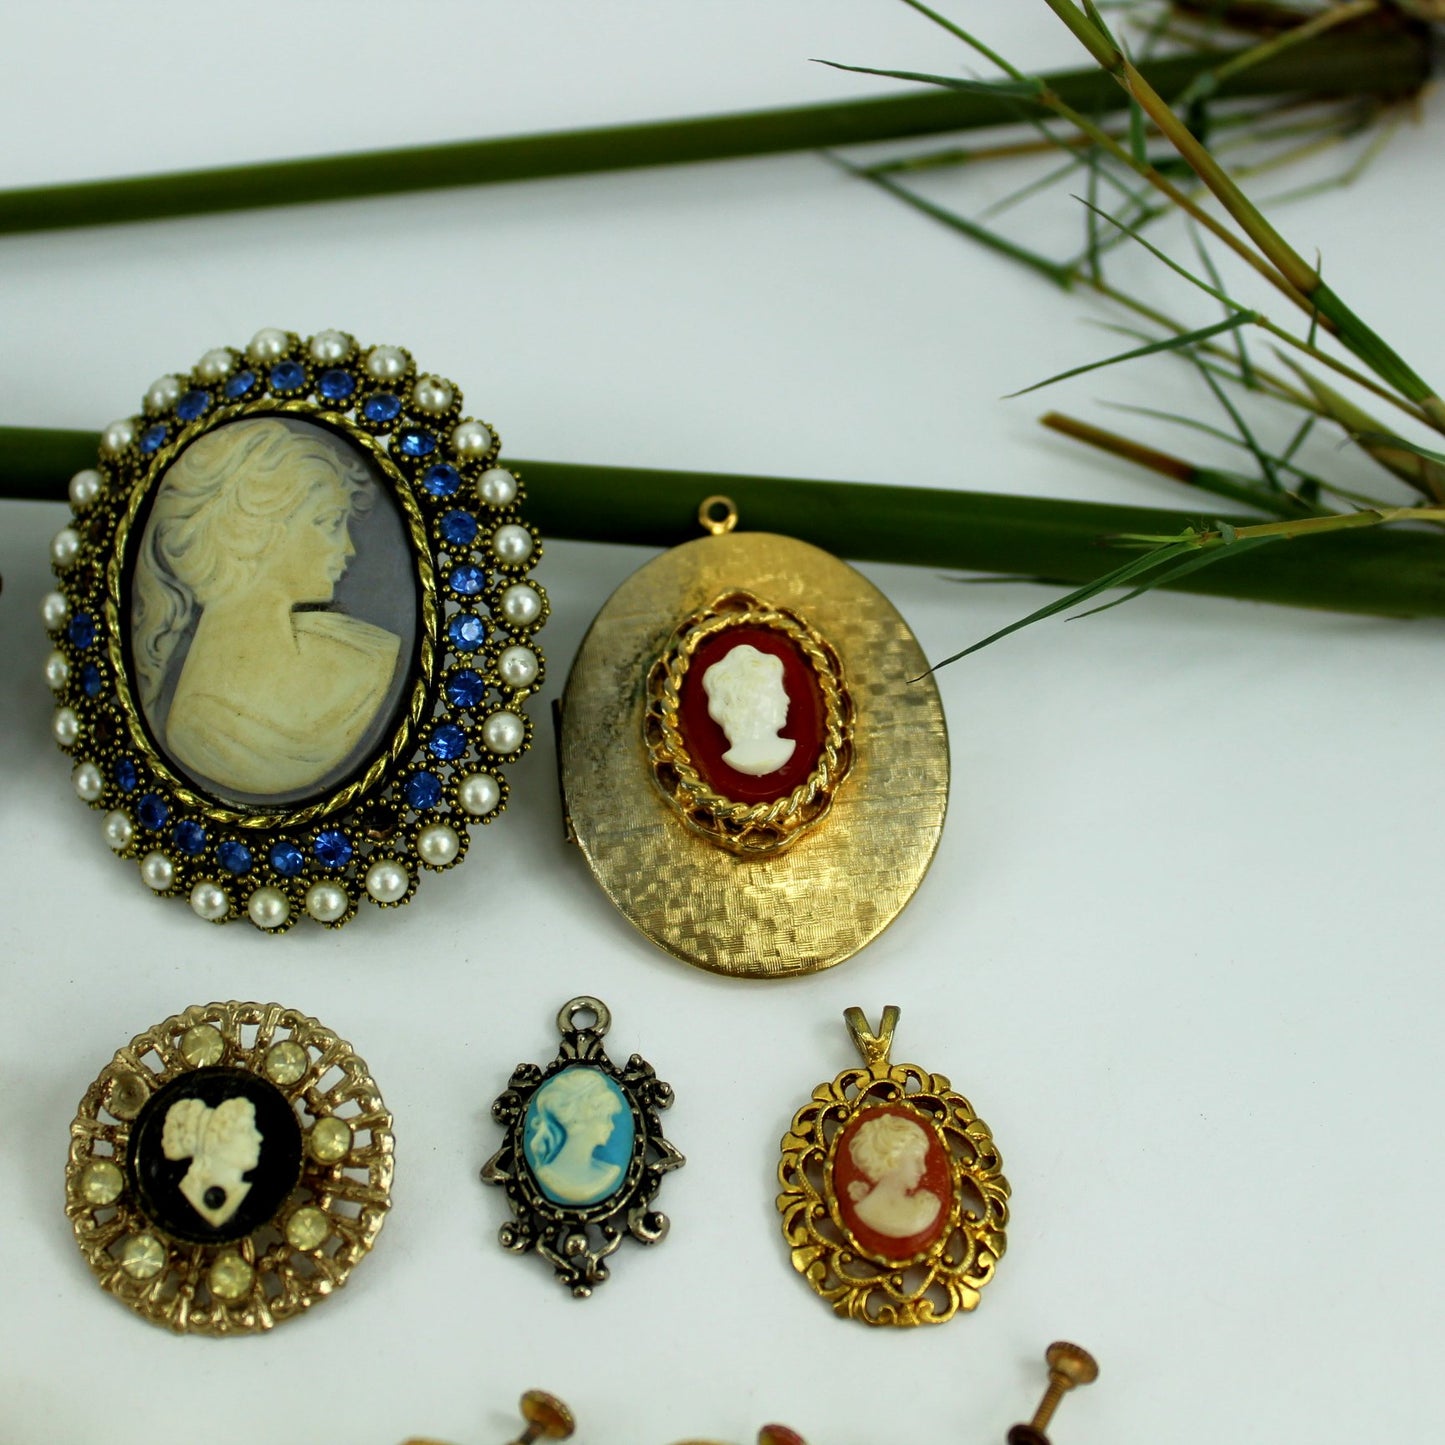 Collection Cameo Jewelry DIY Project Pins Earrings Lockets Repurpose closeup photo